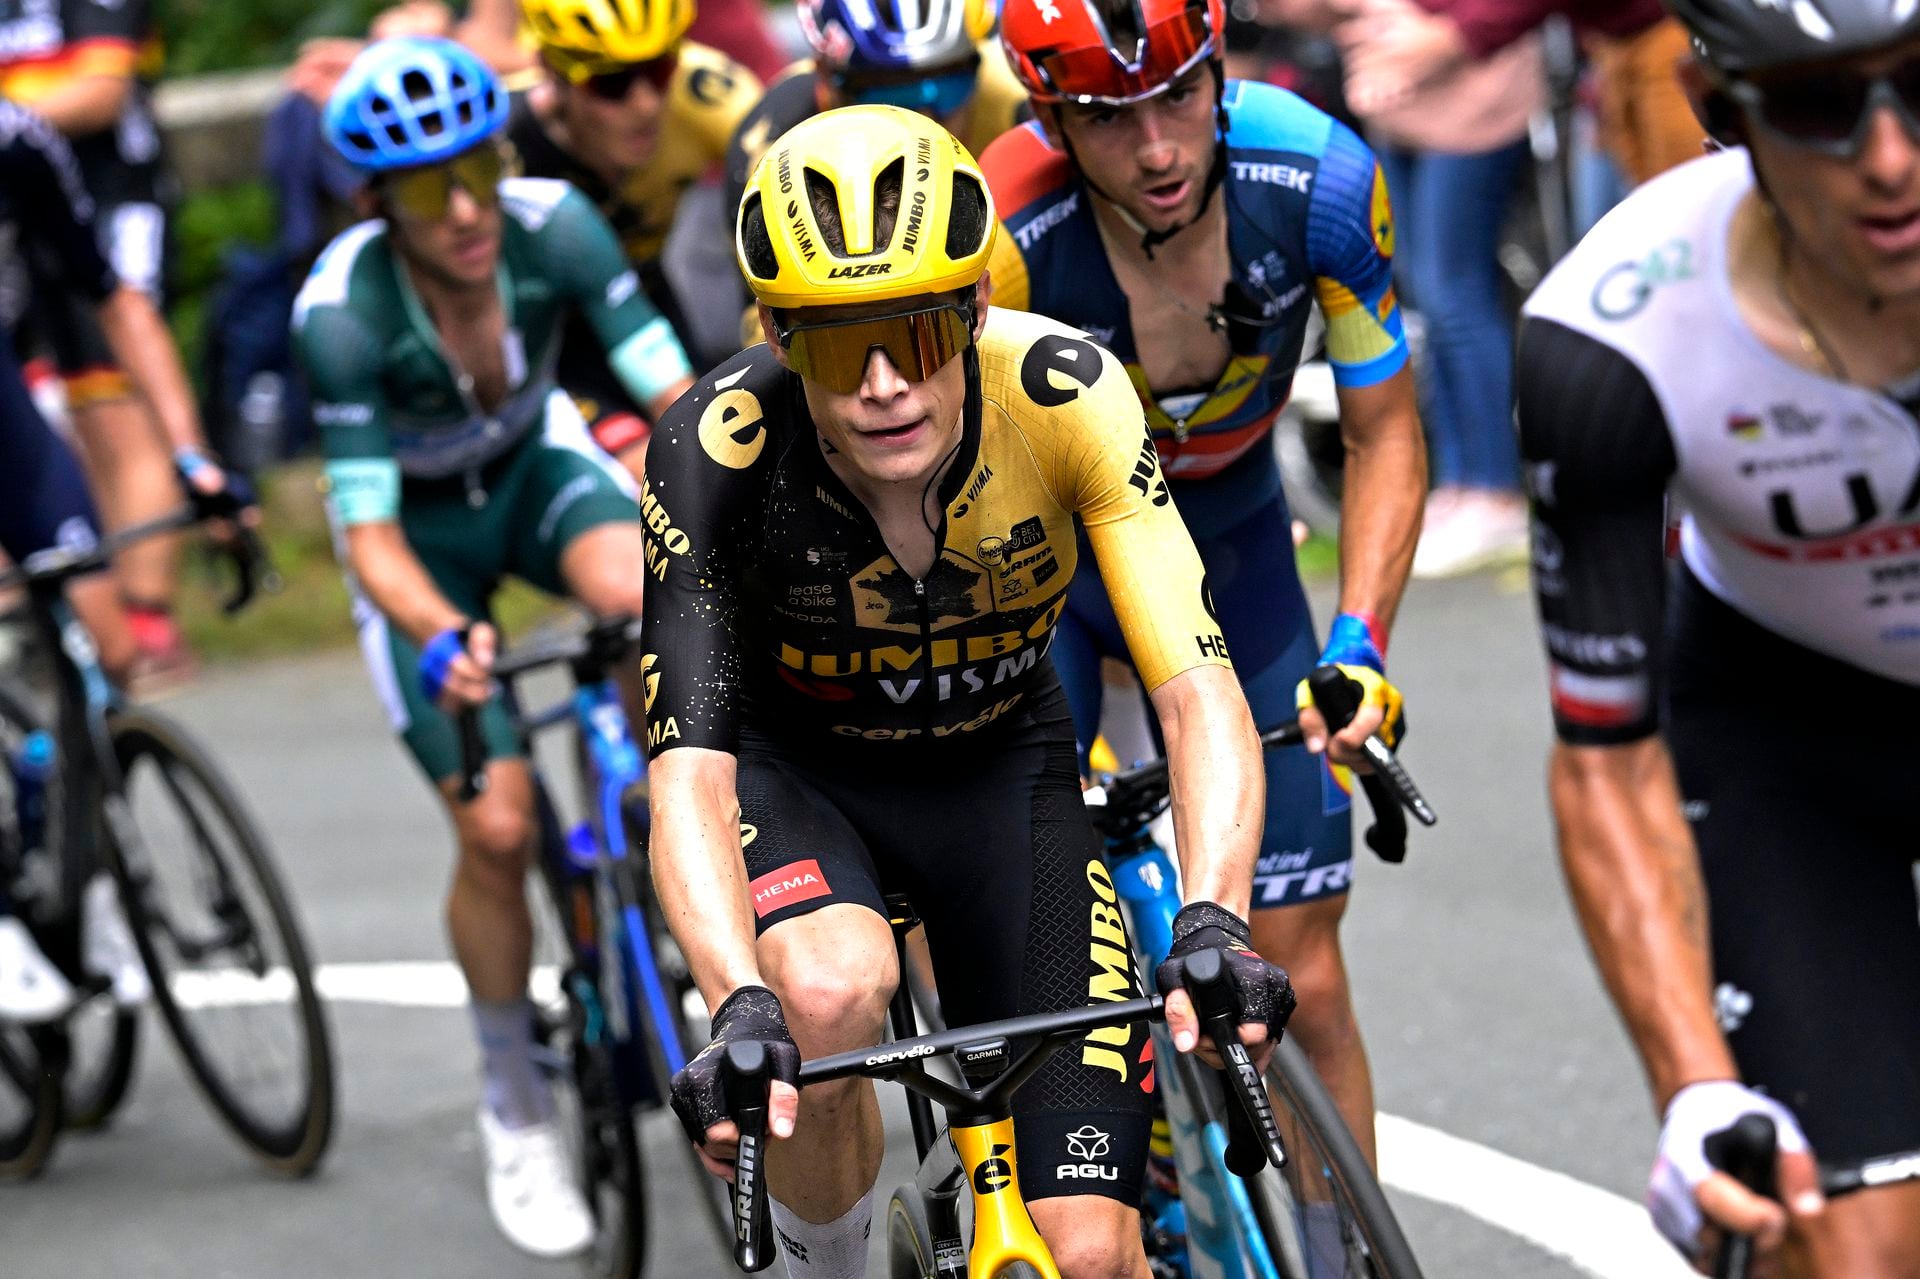 SAN SÉBASTIÁN, SPAIN - JULY 02: Jonas Vingegaard of Denmark and Team Jumbo-Visma competes during the stage two of the 110th Tour de France 2023 a 208.9km stage from Vitoria-Gasteiz to San Sébastián / #UCIWT / on July 02, 2023 in San Sébastián, Spain. (Photo by Bernard Papon - Pool/Getty Images)